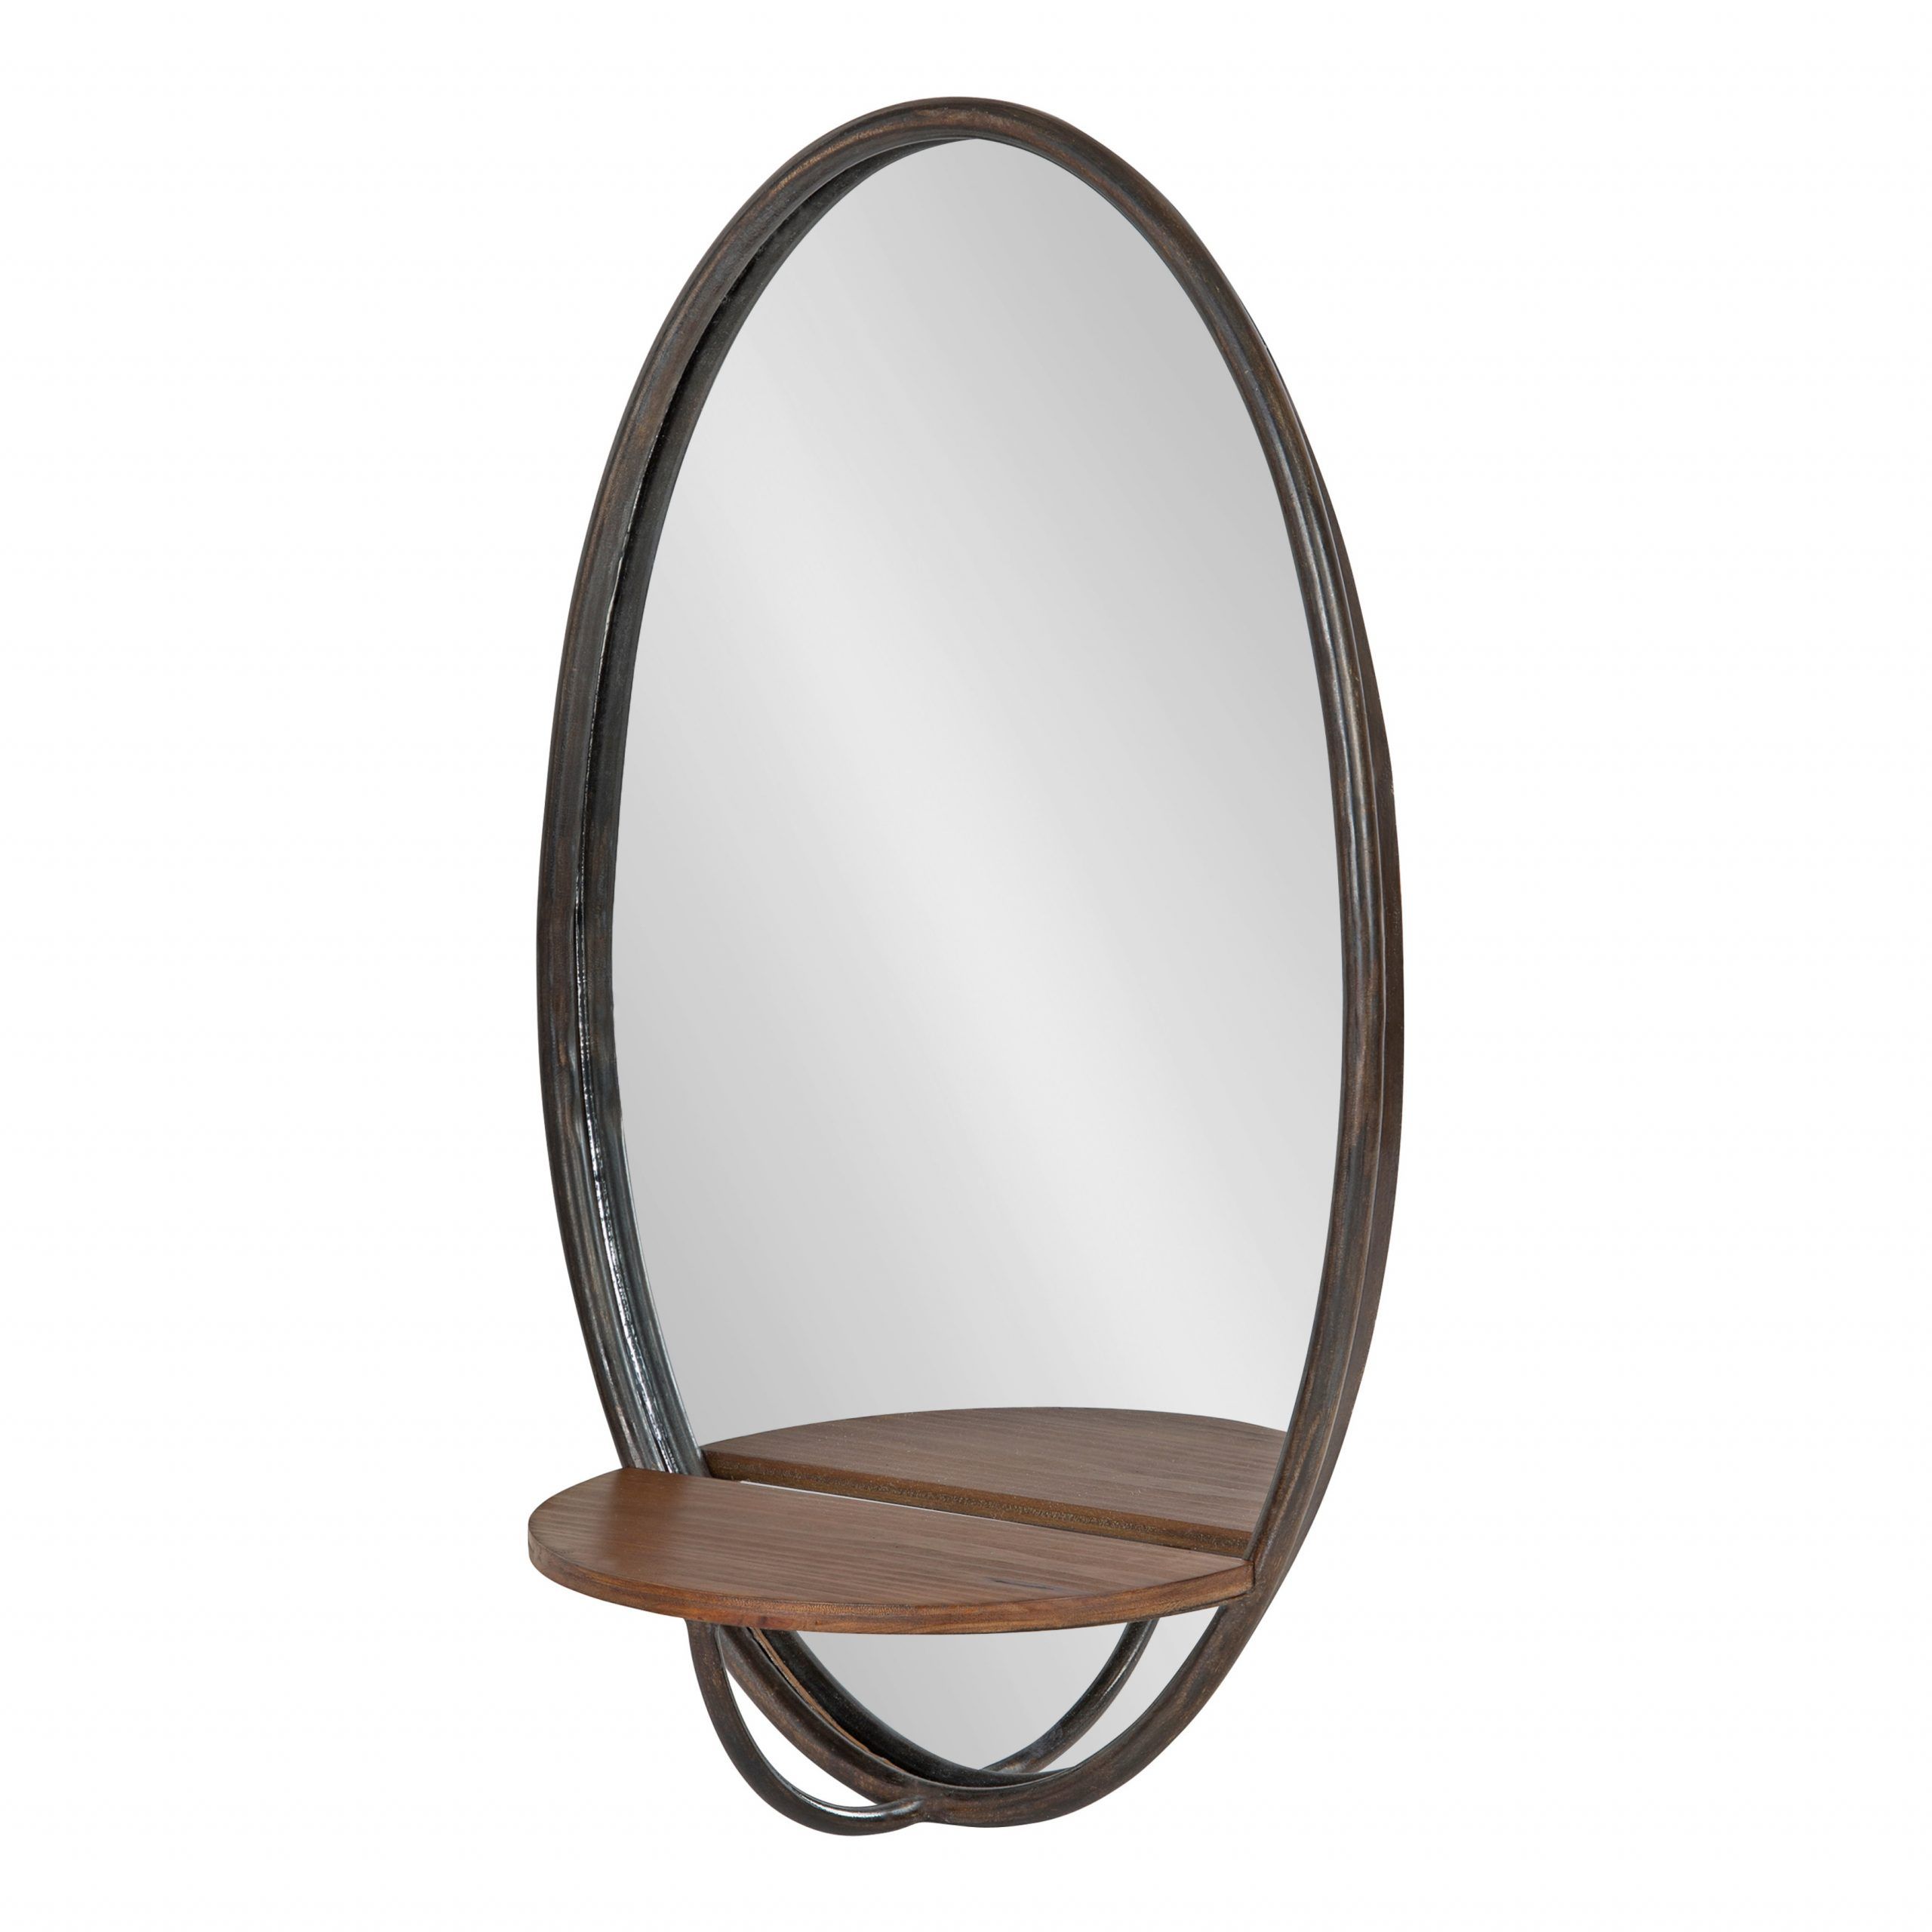 Most Recent Kate And Laurel Gita Rustic Oval Wall Mirror With Shelf, 15" X 24 Within Wooden Oval Wall Mirrors (View 5 of 15)